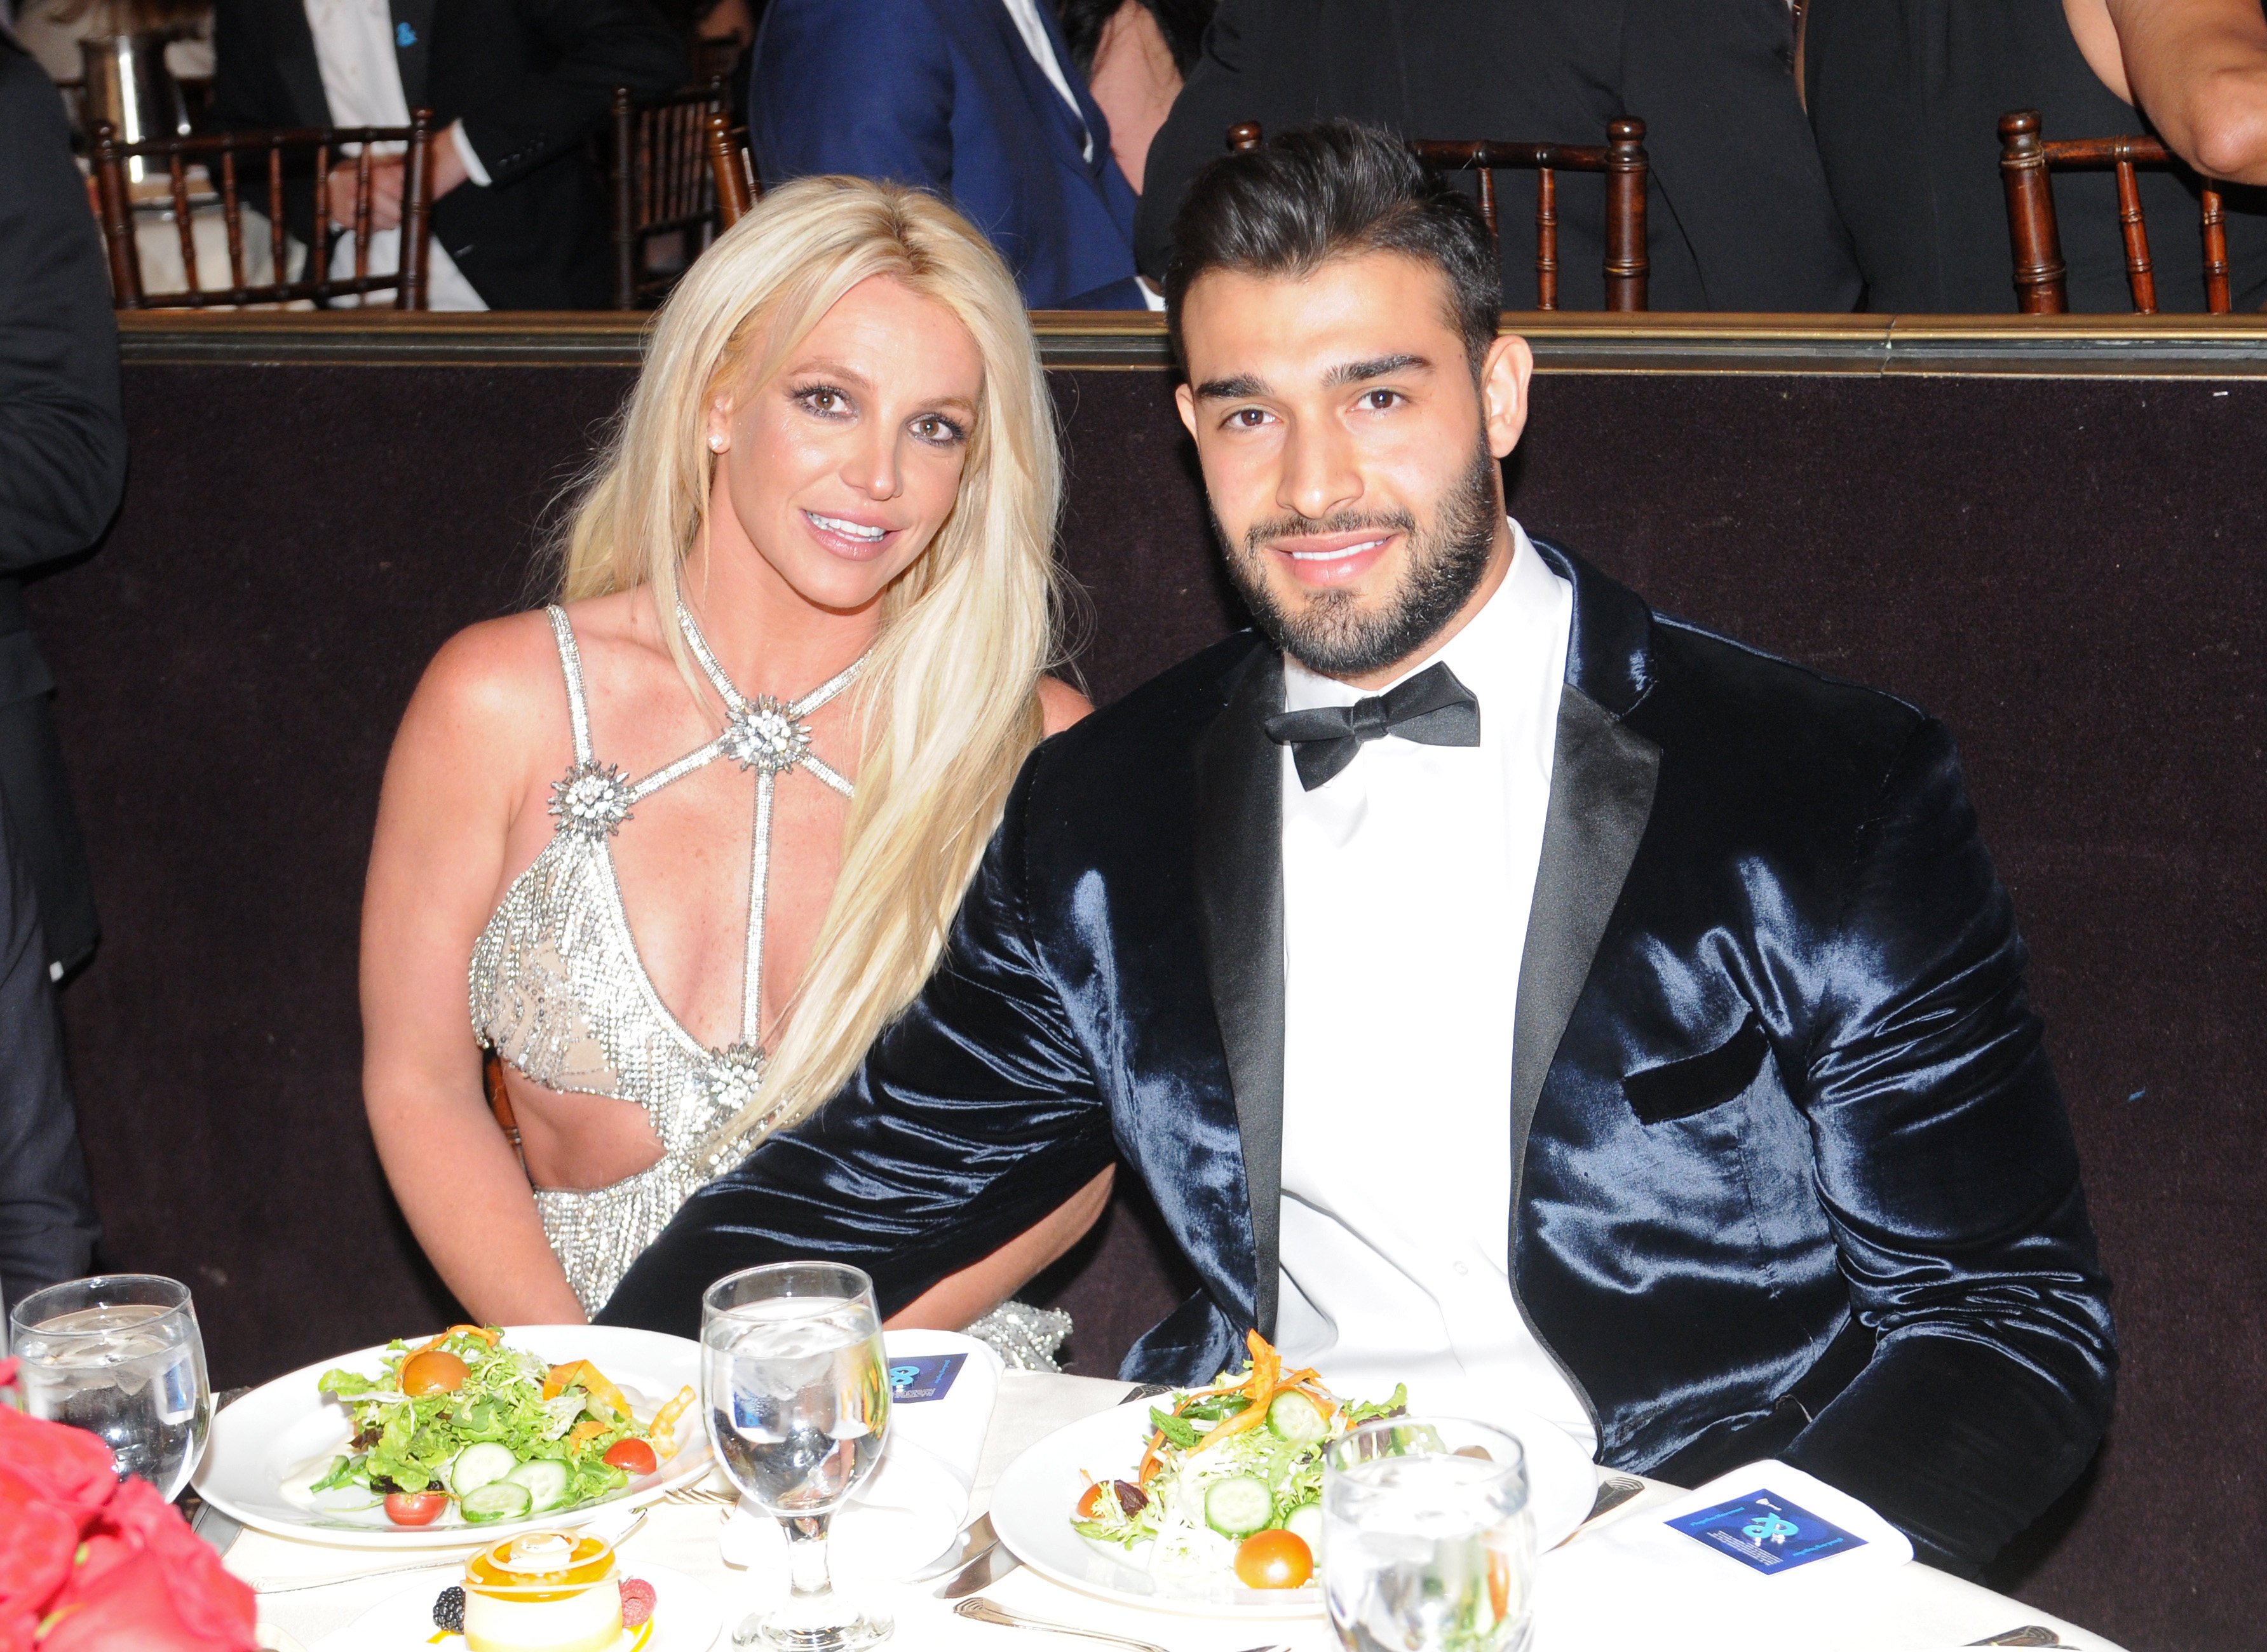 Britney Spears and her fiancé Sam Asghari are welcoming their first child together. Photo: Getty